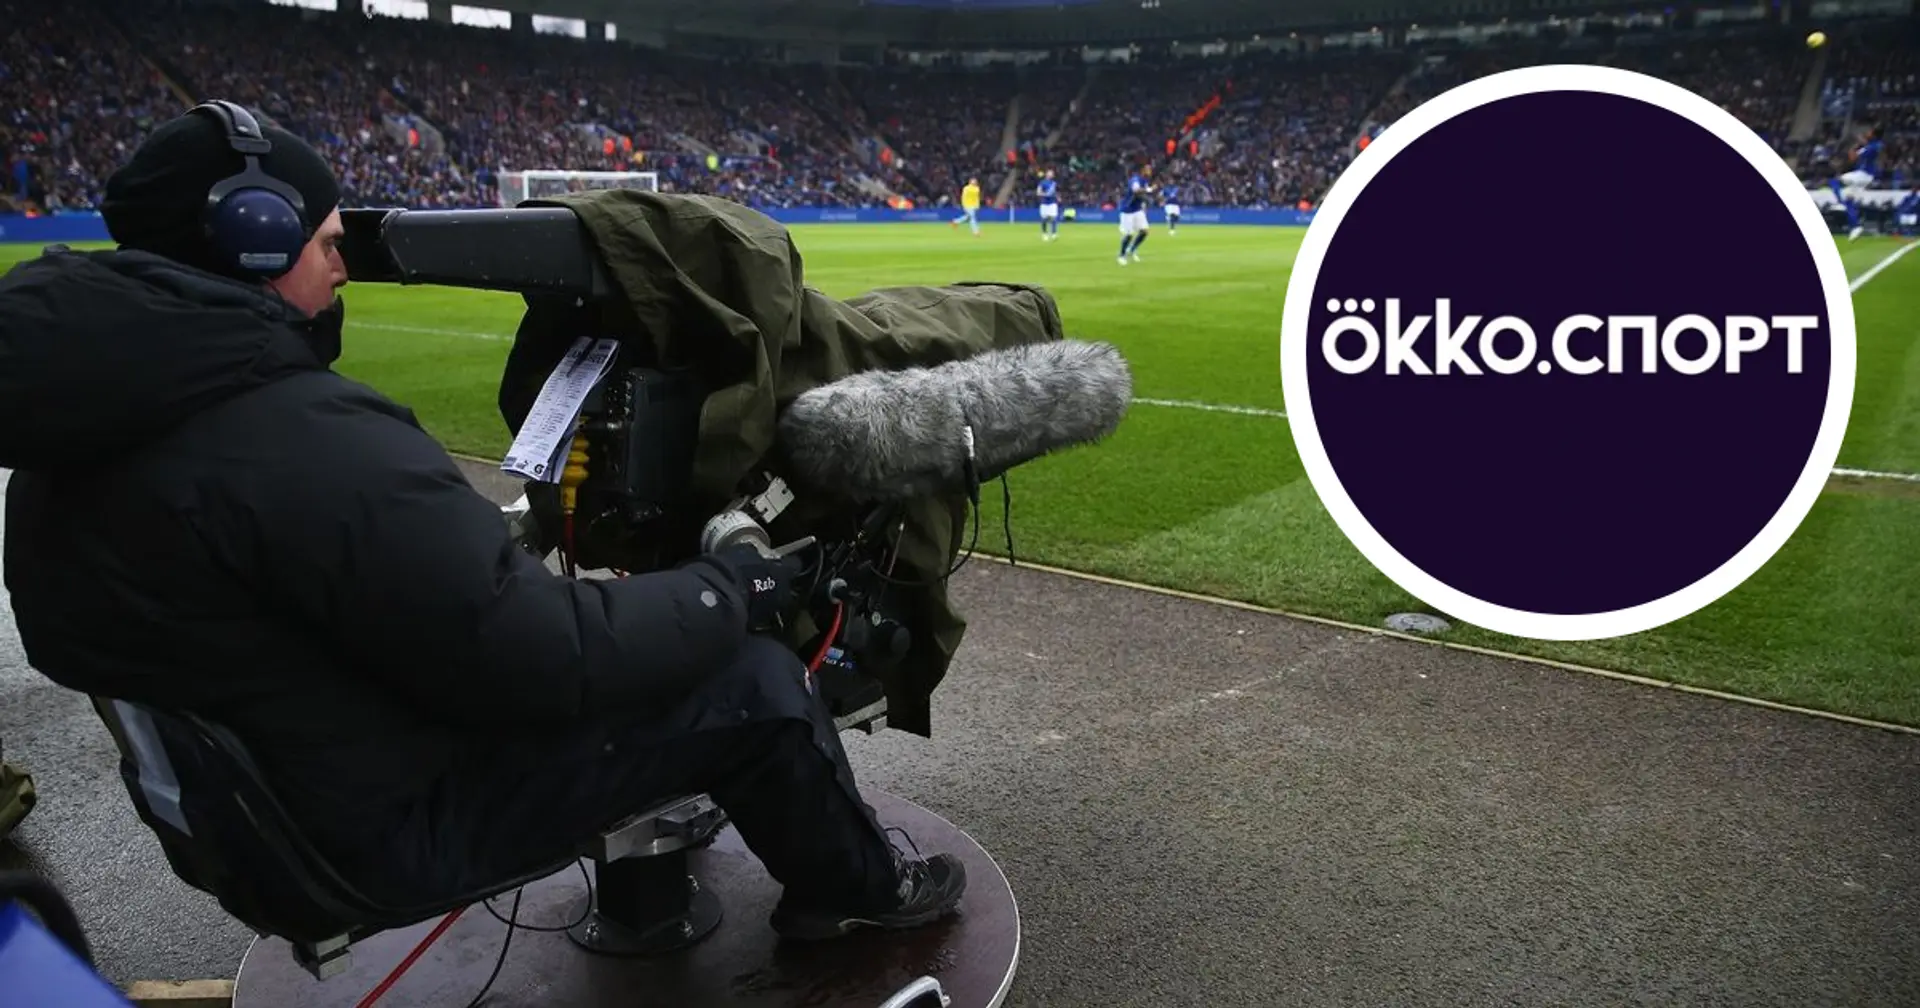 OFFICIAL: Premier League suspends agreement with Russian broadcast partner